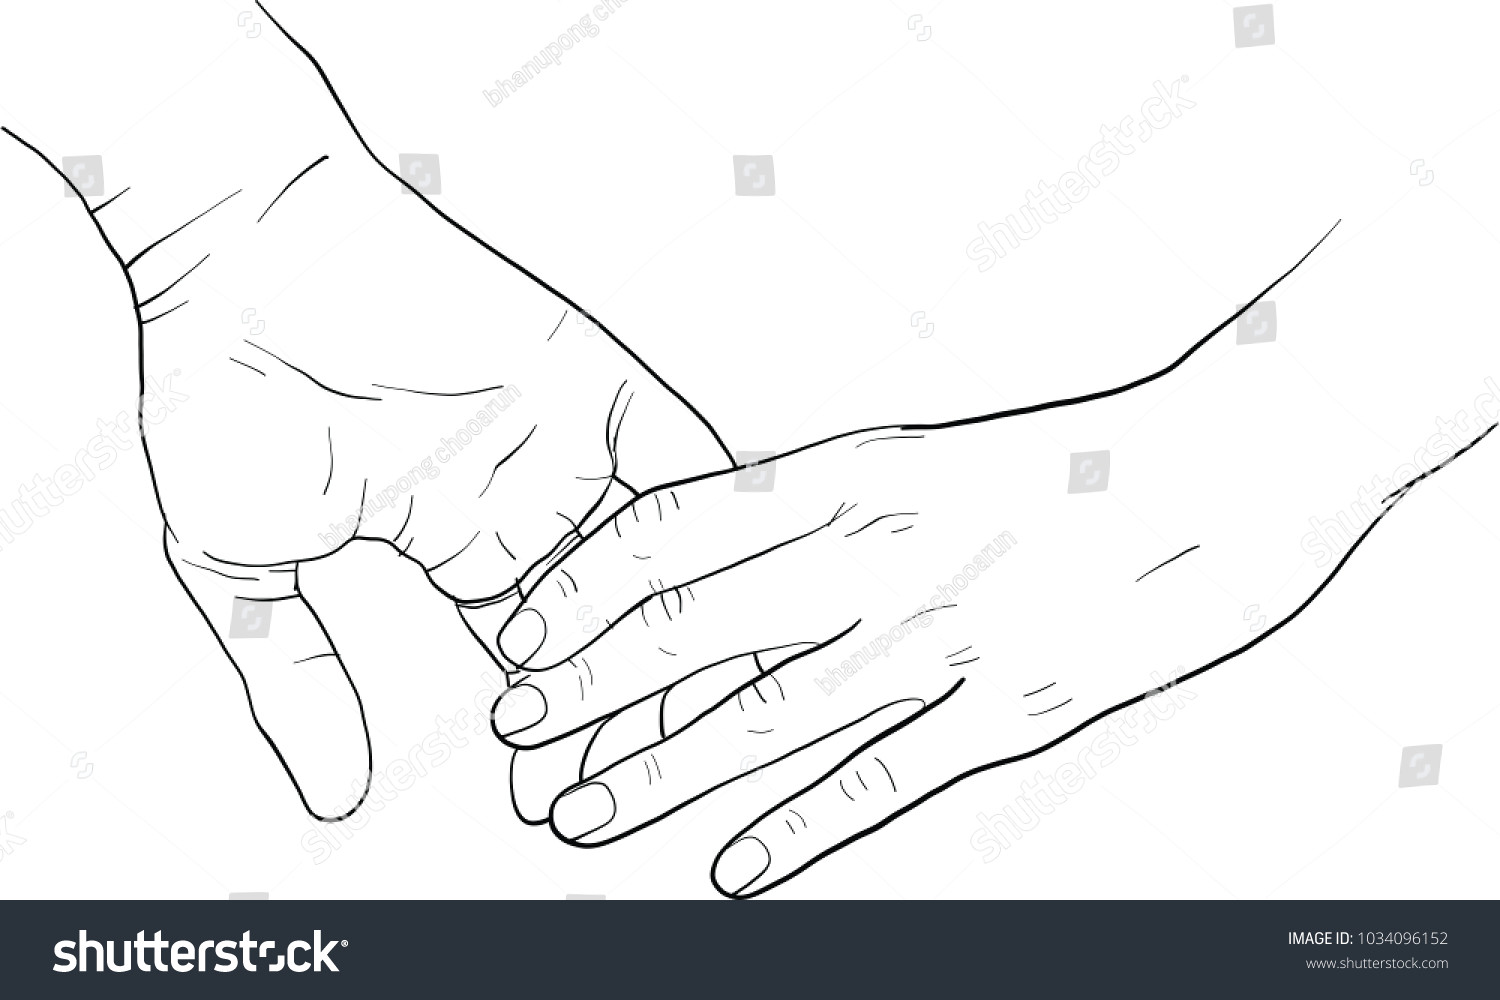 stock vector hand holding hand together vector 1034096152 jpg